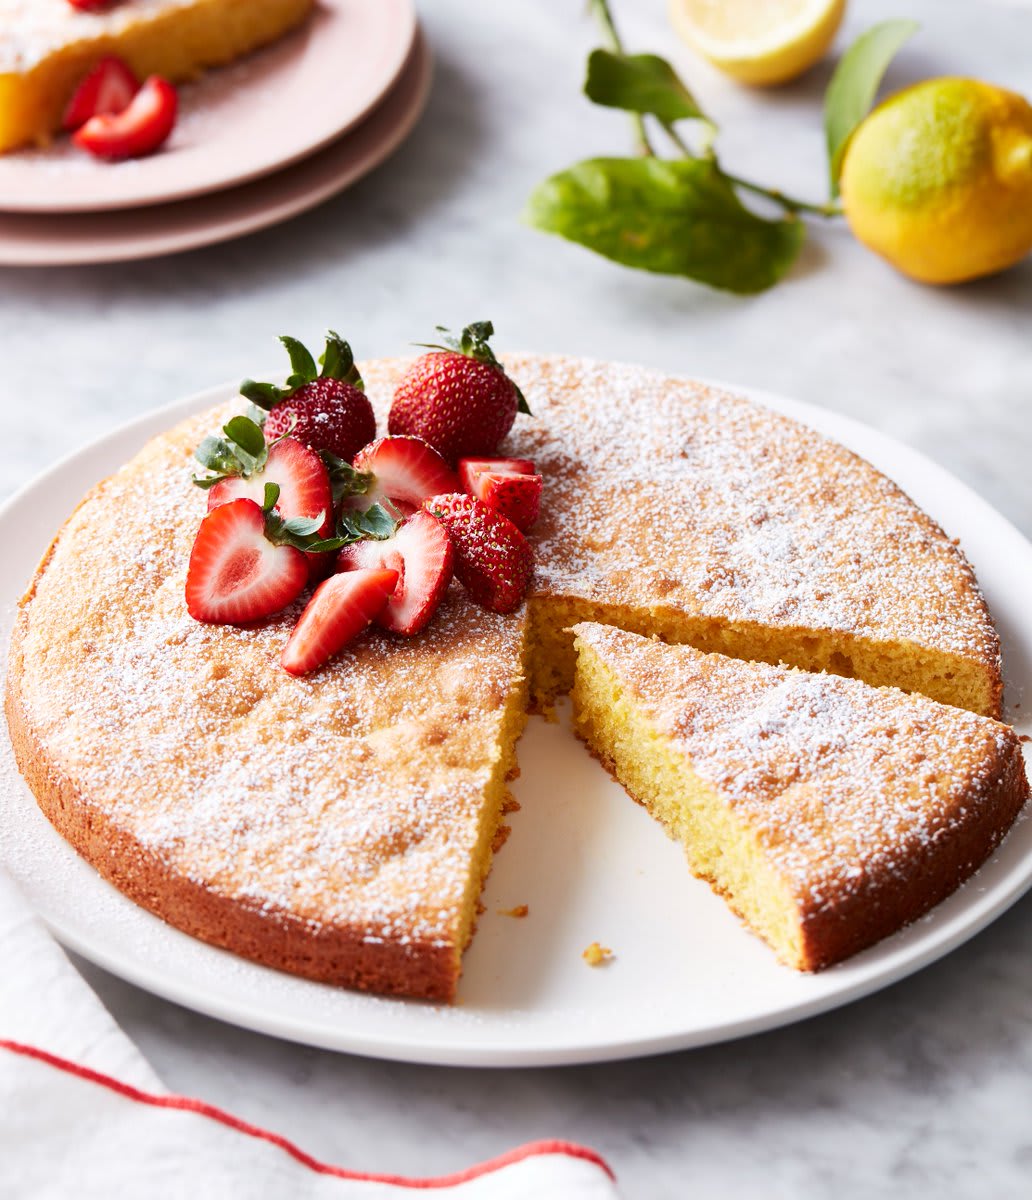 This flourless 5-ingredient almond cake is perfectly lemony: